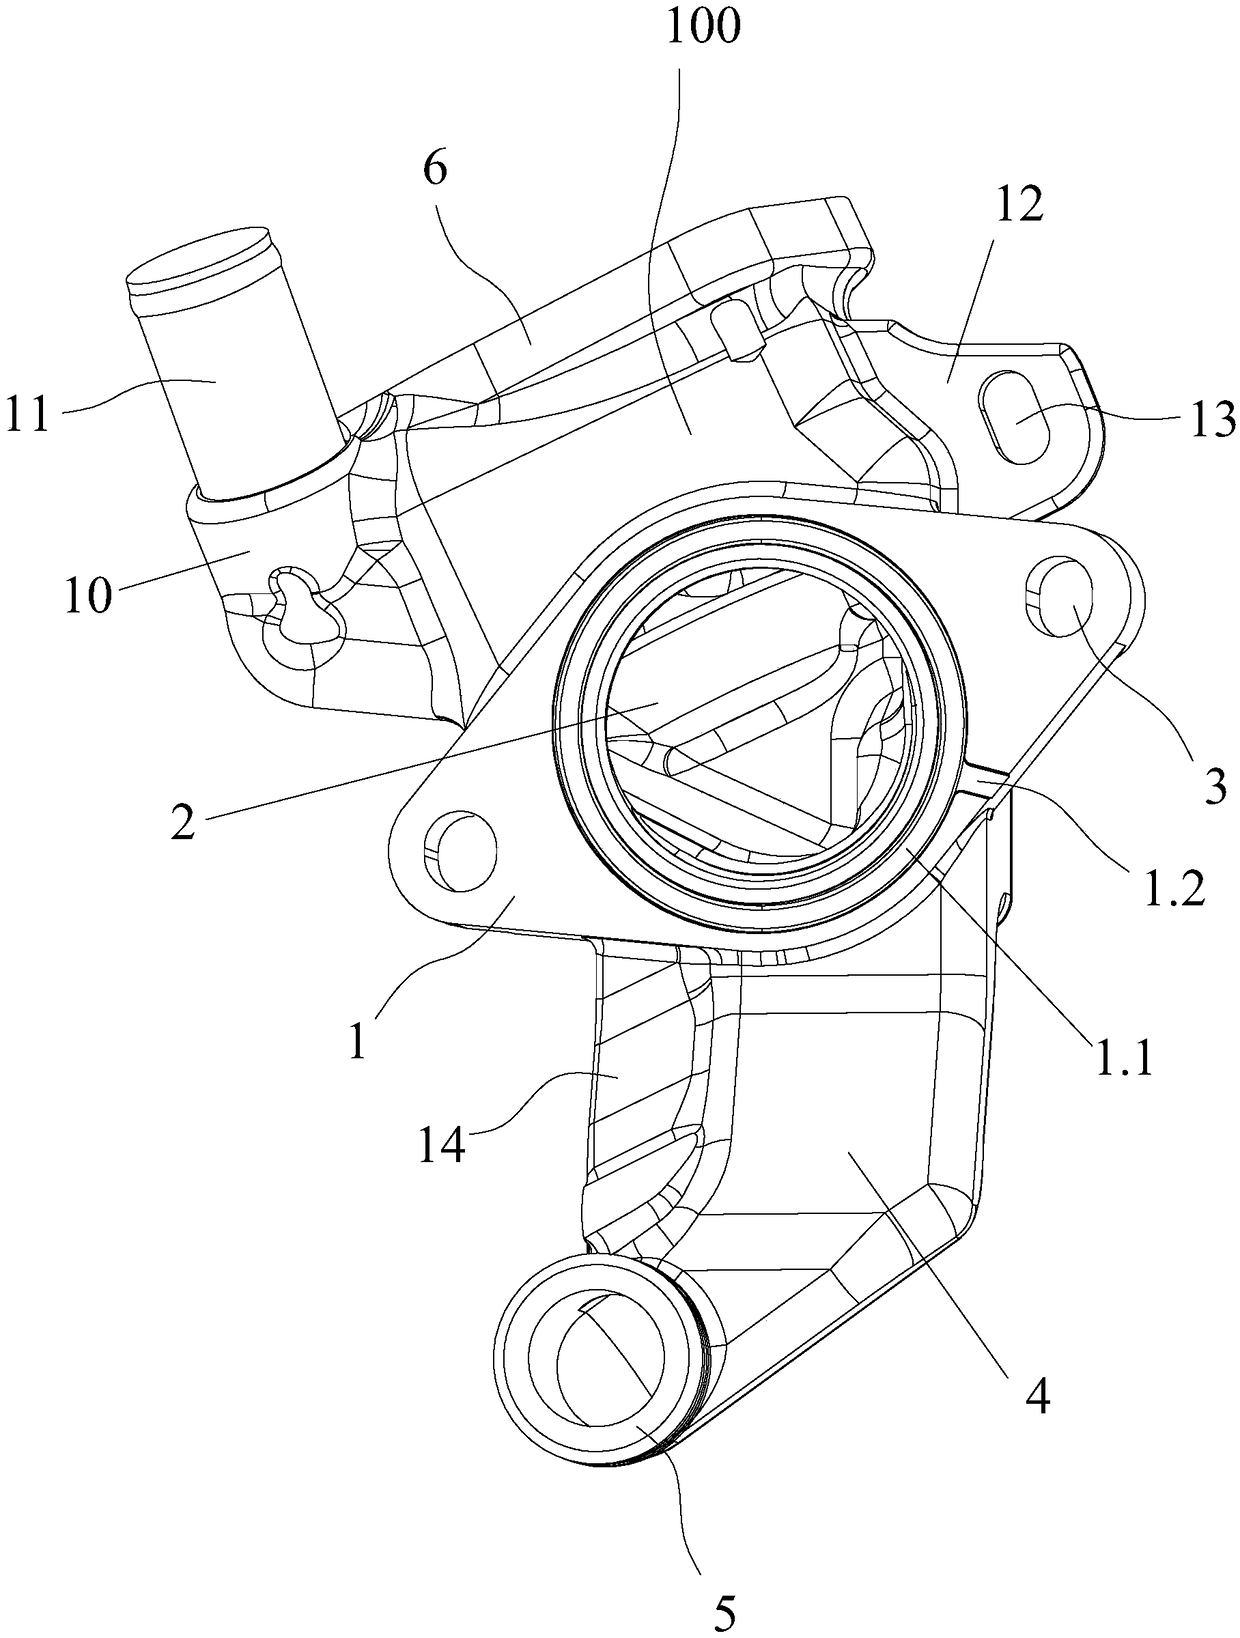 Lower shell of thermostat and machining method of lower shell